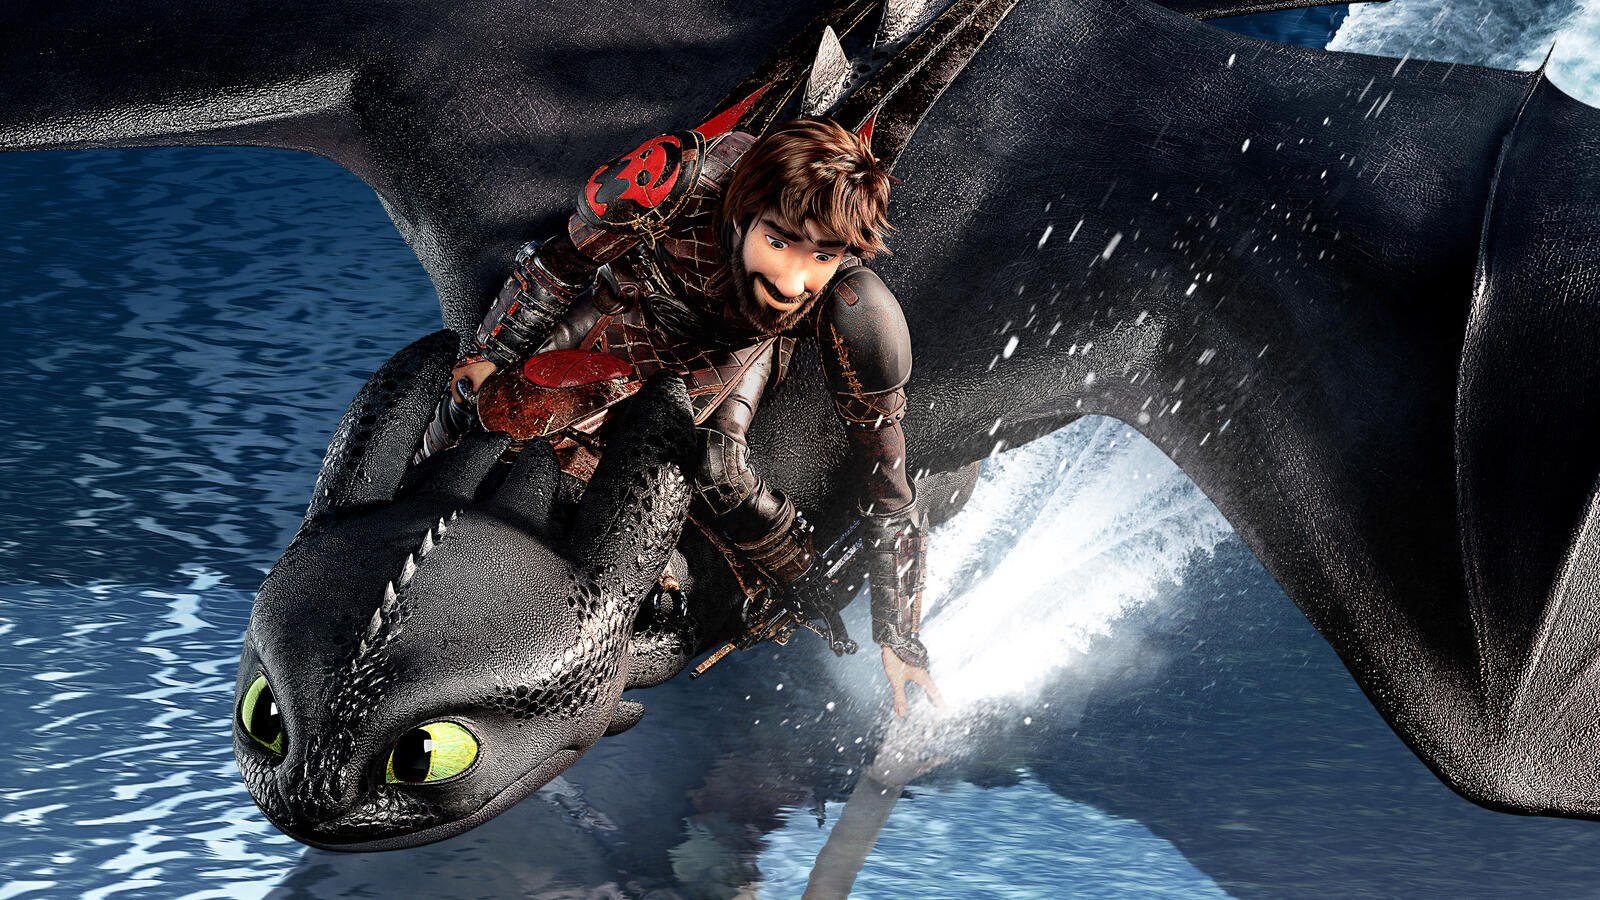 Wallpapers movies dragon how to train your dragon on the desktop